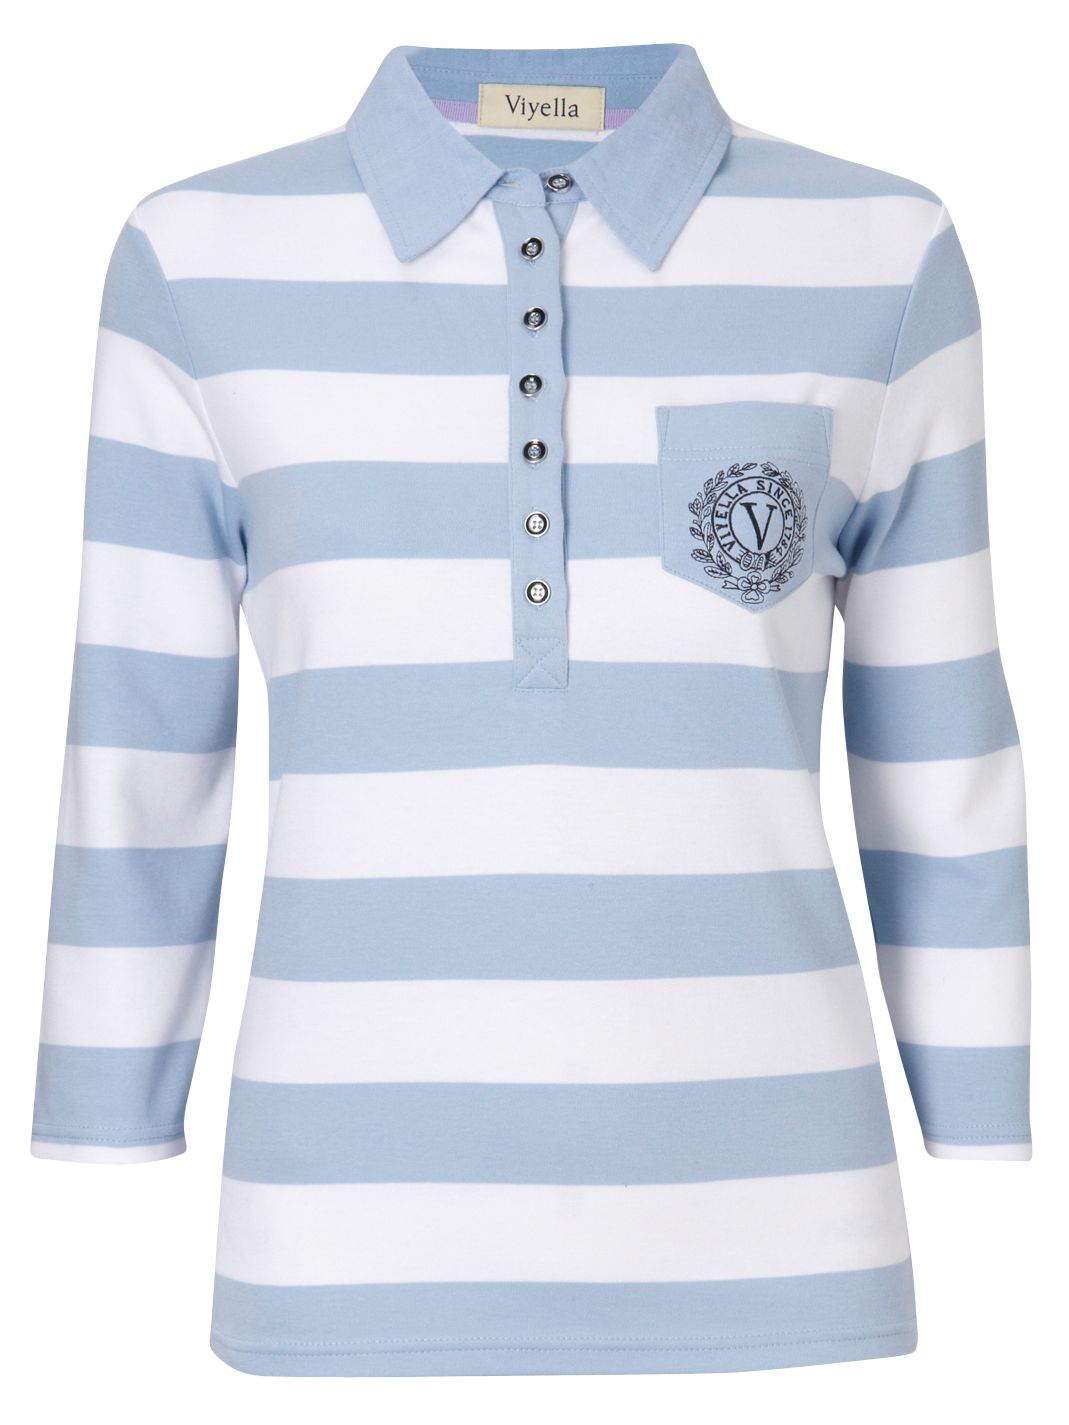 ¾ Sleeve Rugby Shirt, Pale blue